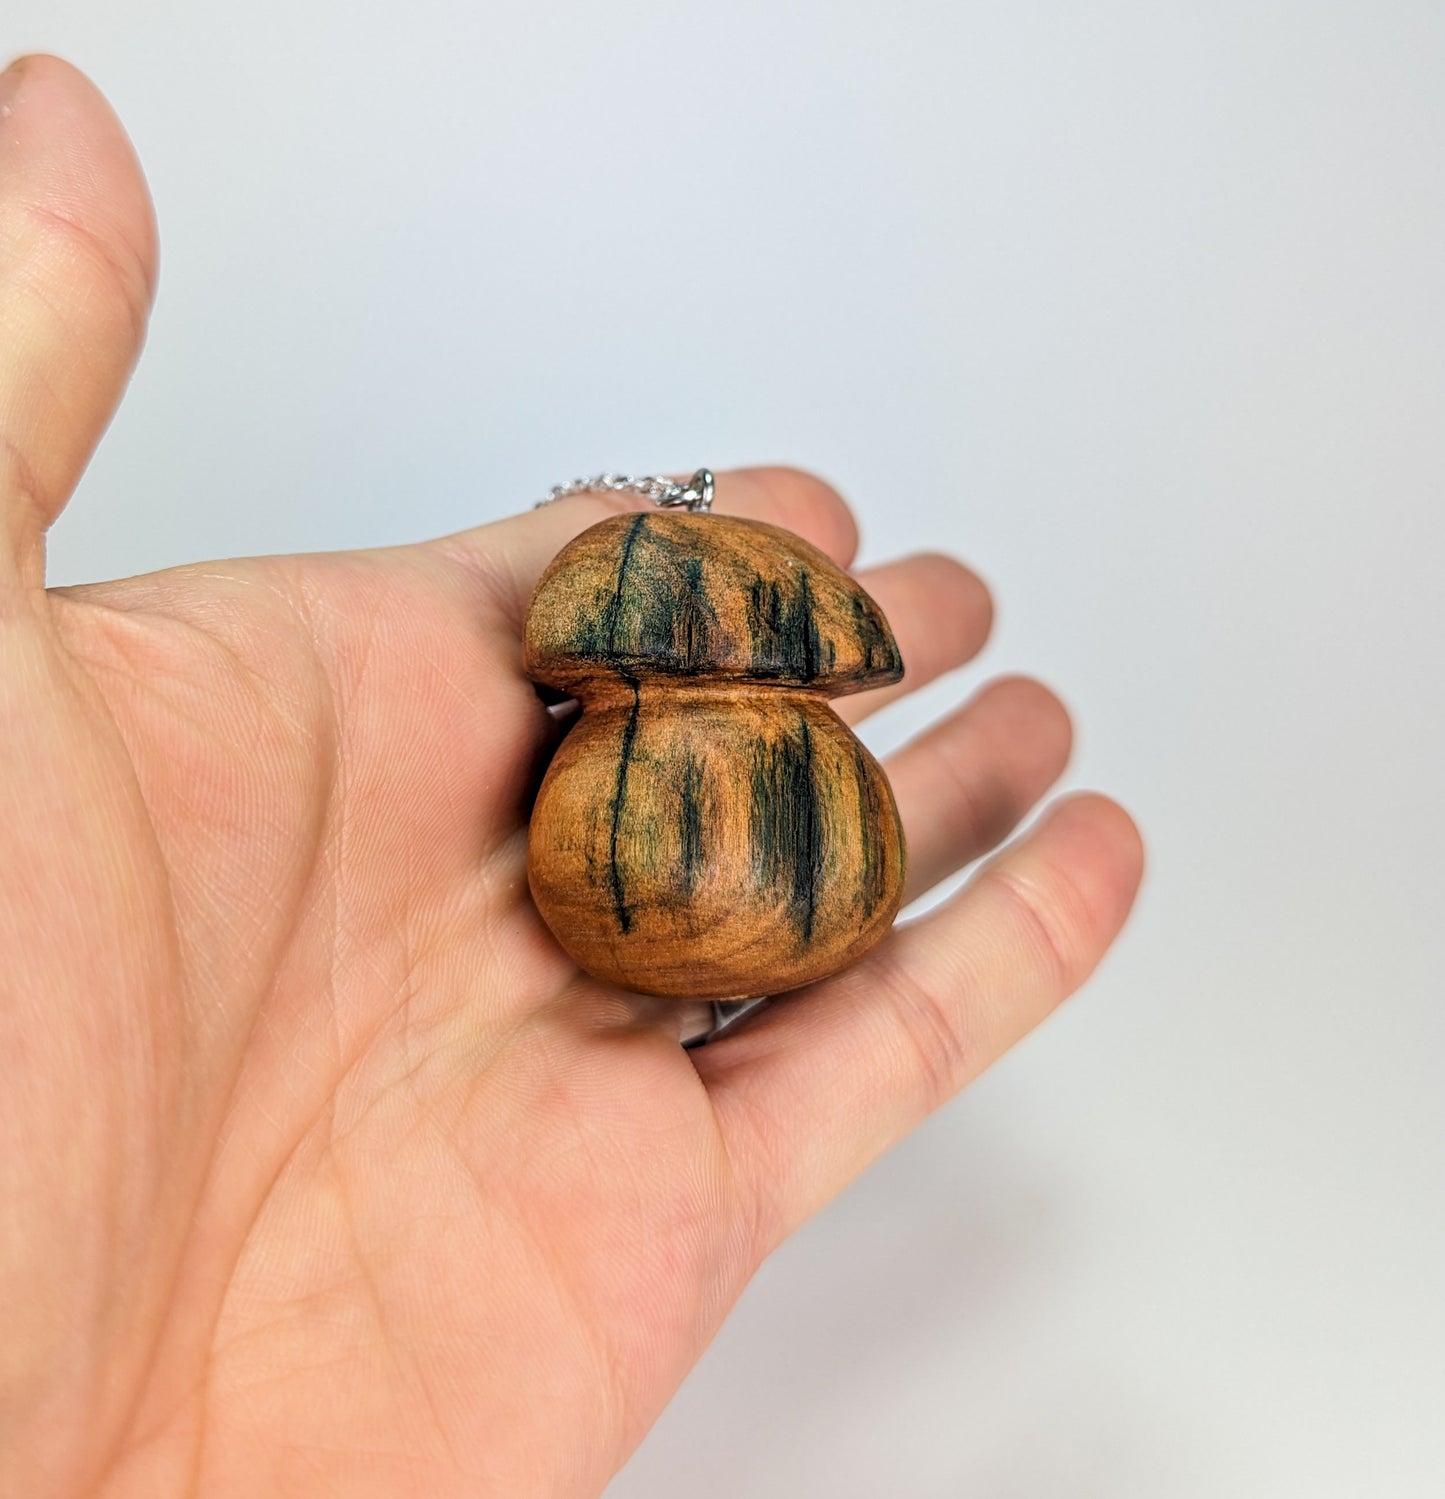 Naturally Fungus-Stained Wooden Pendant | Large Porcini